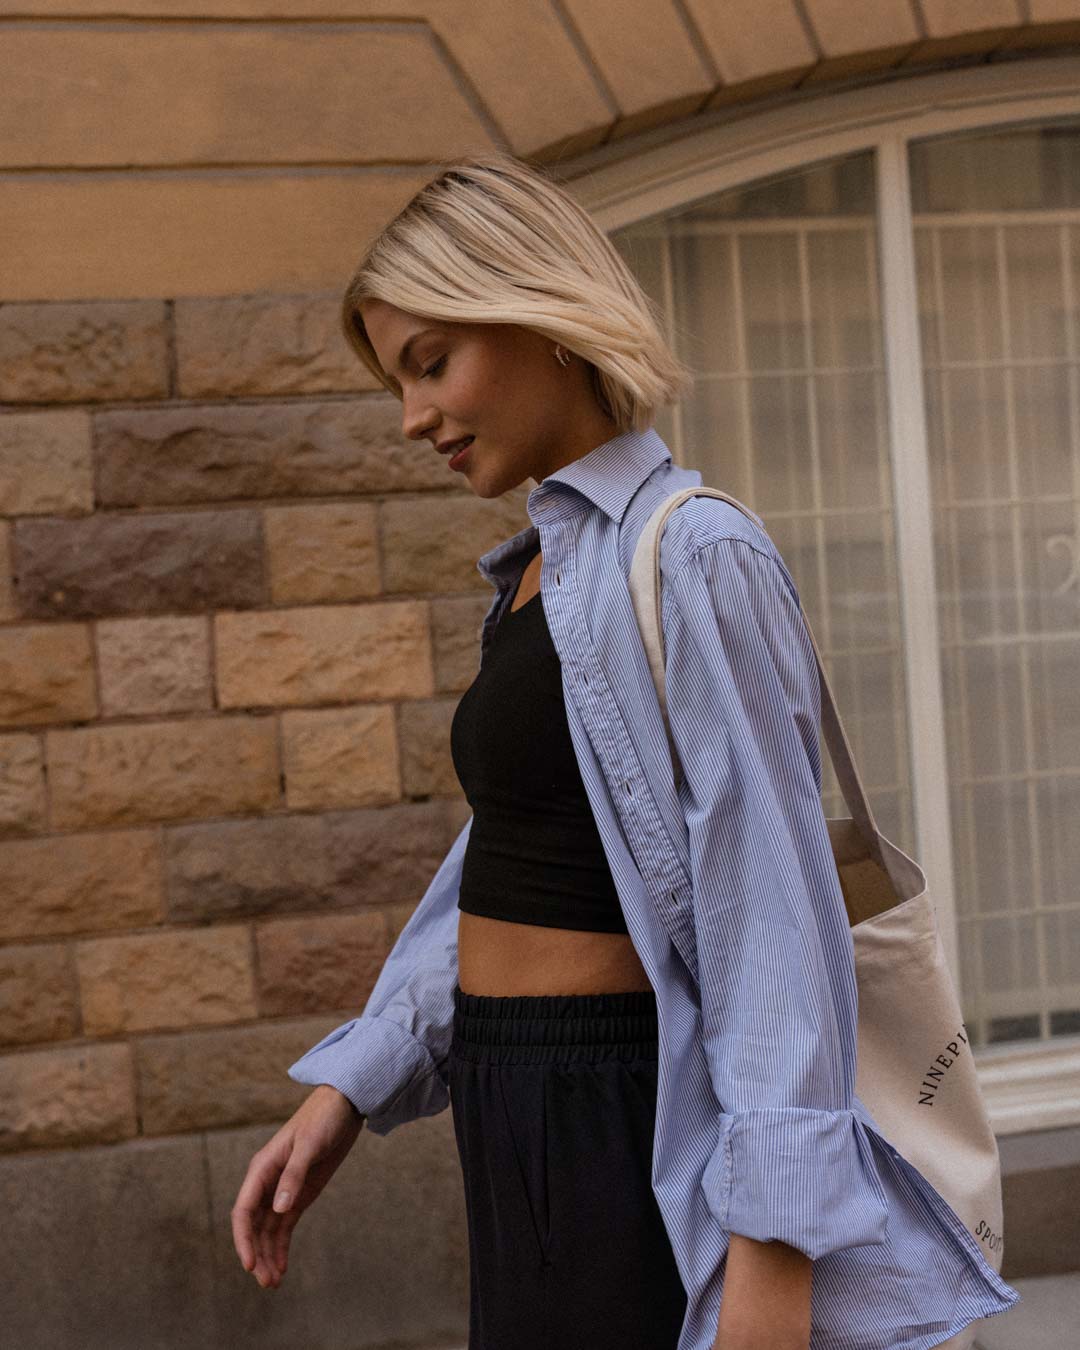 profile close up of a blonde woman in a blue dress shirt and ninepine crop tank walking down a street